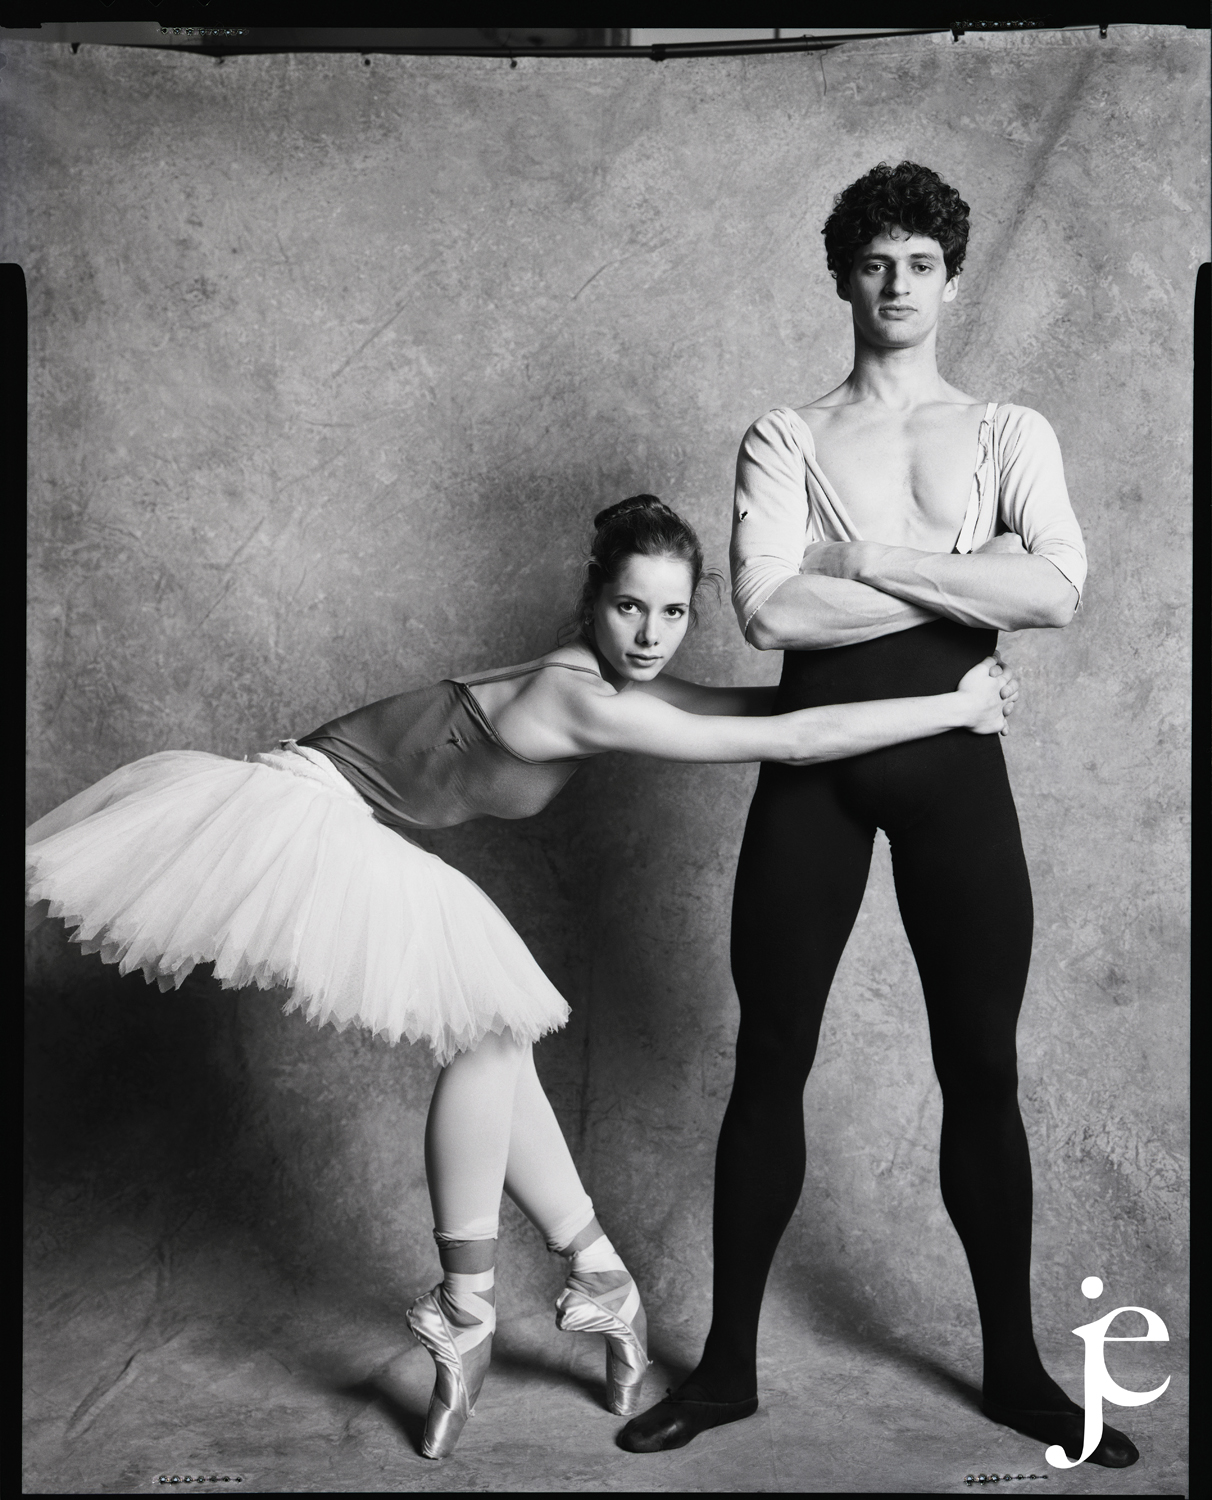 Ballet Dancers Darcey Bussel and Jonathan Cope at the Royal Opera House, London 1993